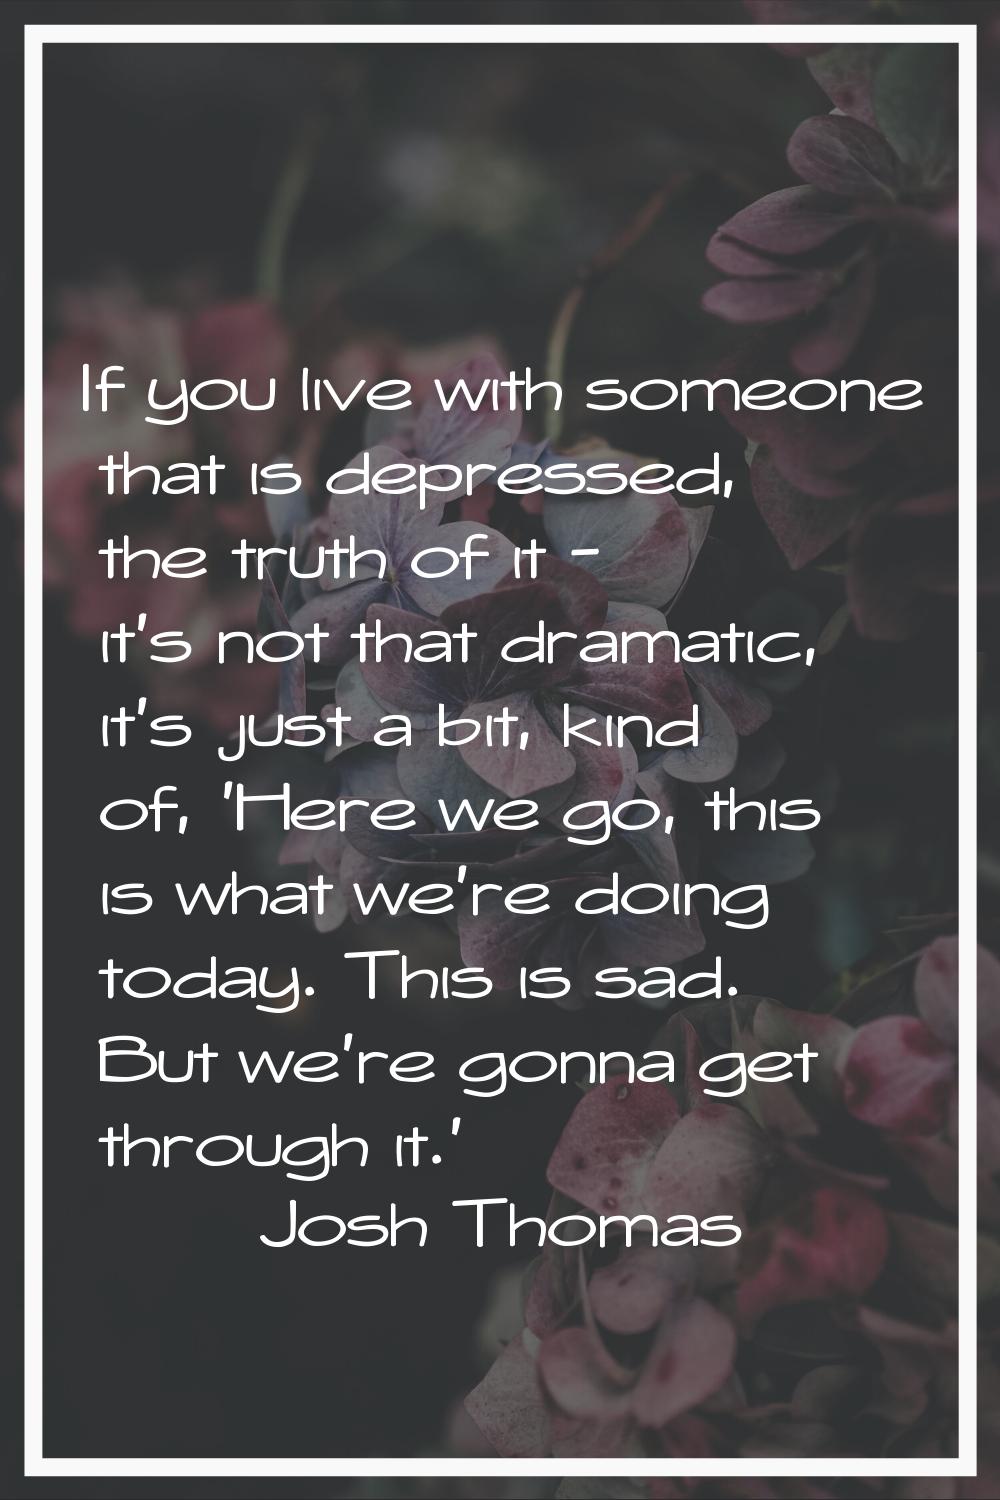 If you live with someone that is depressed, the truth of it - it's not that dramatic, it's just a b